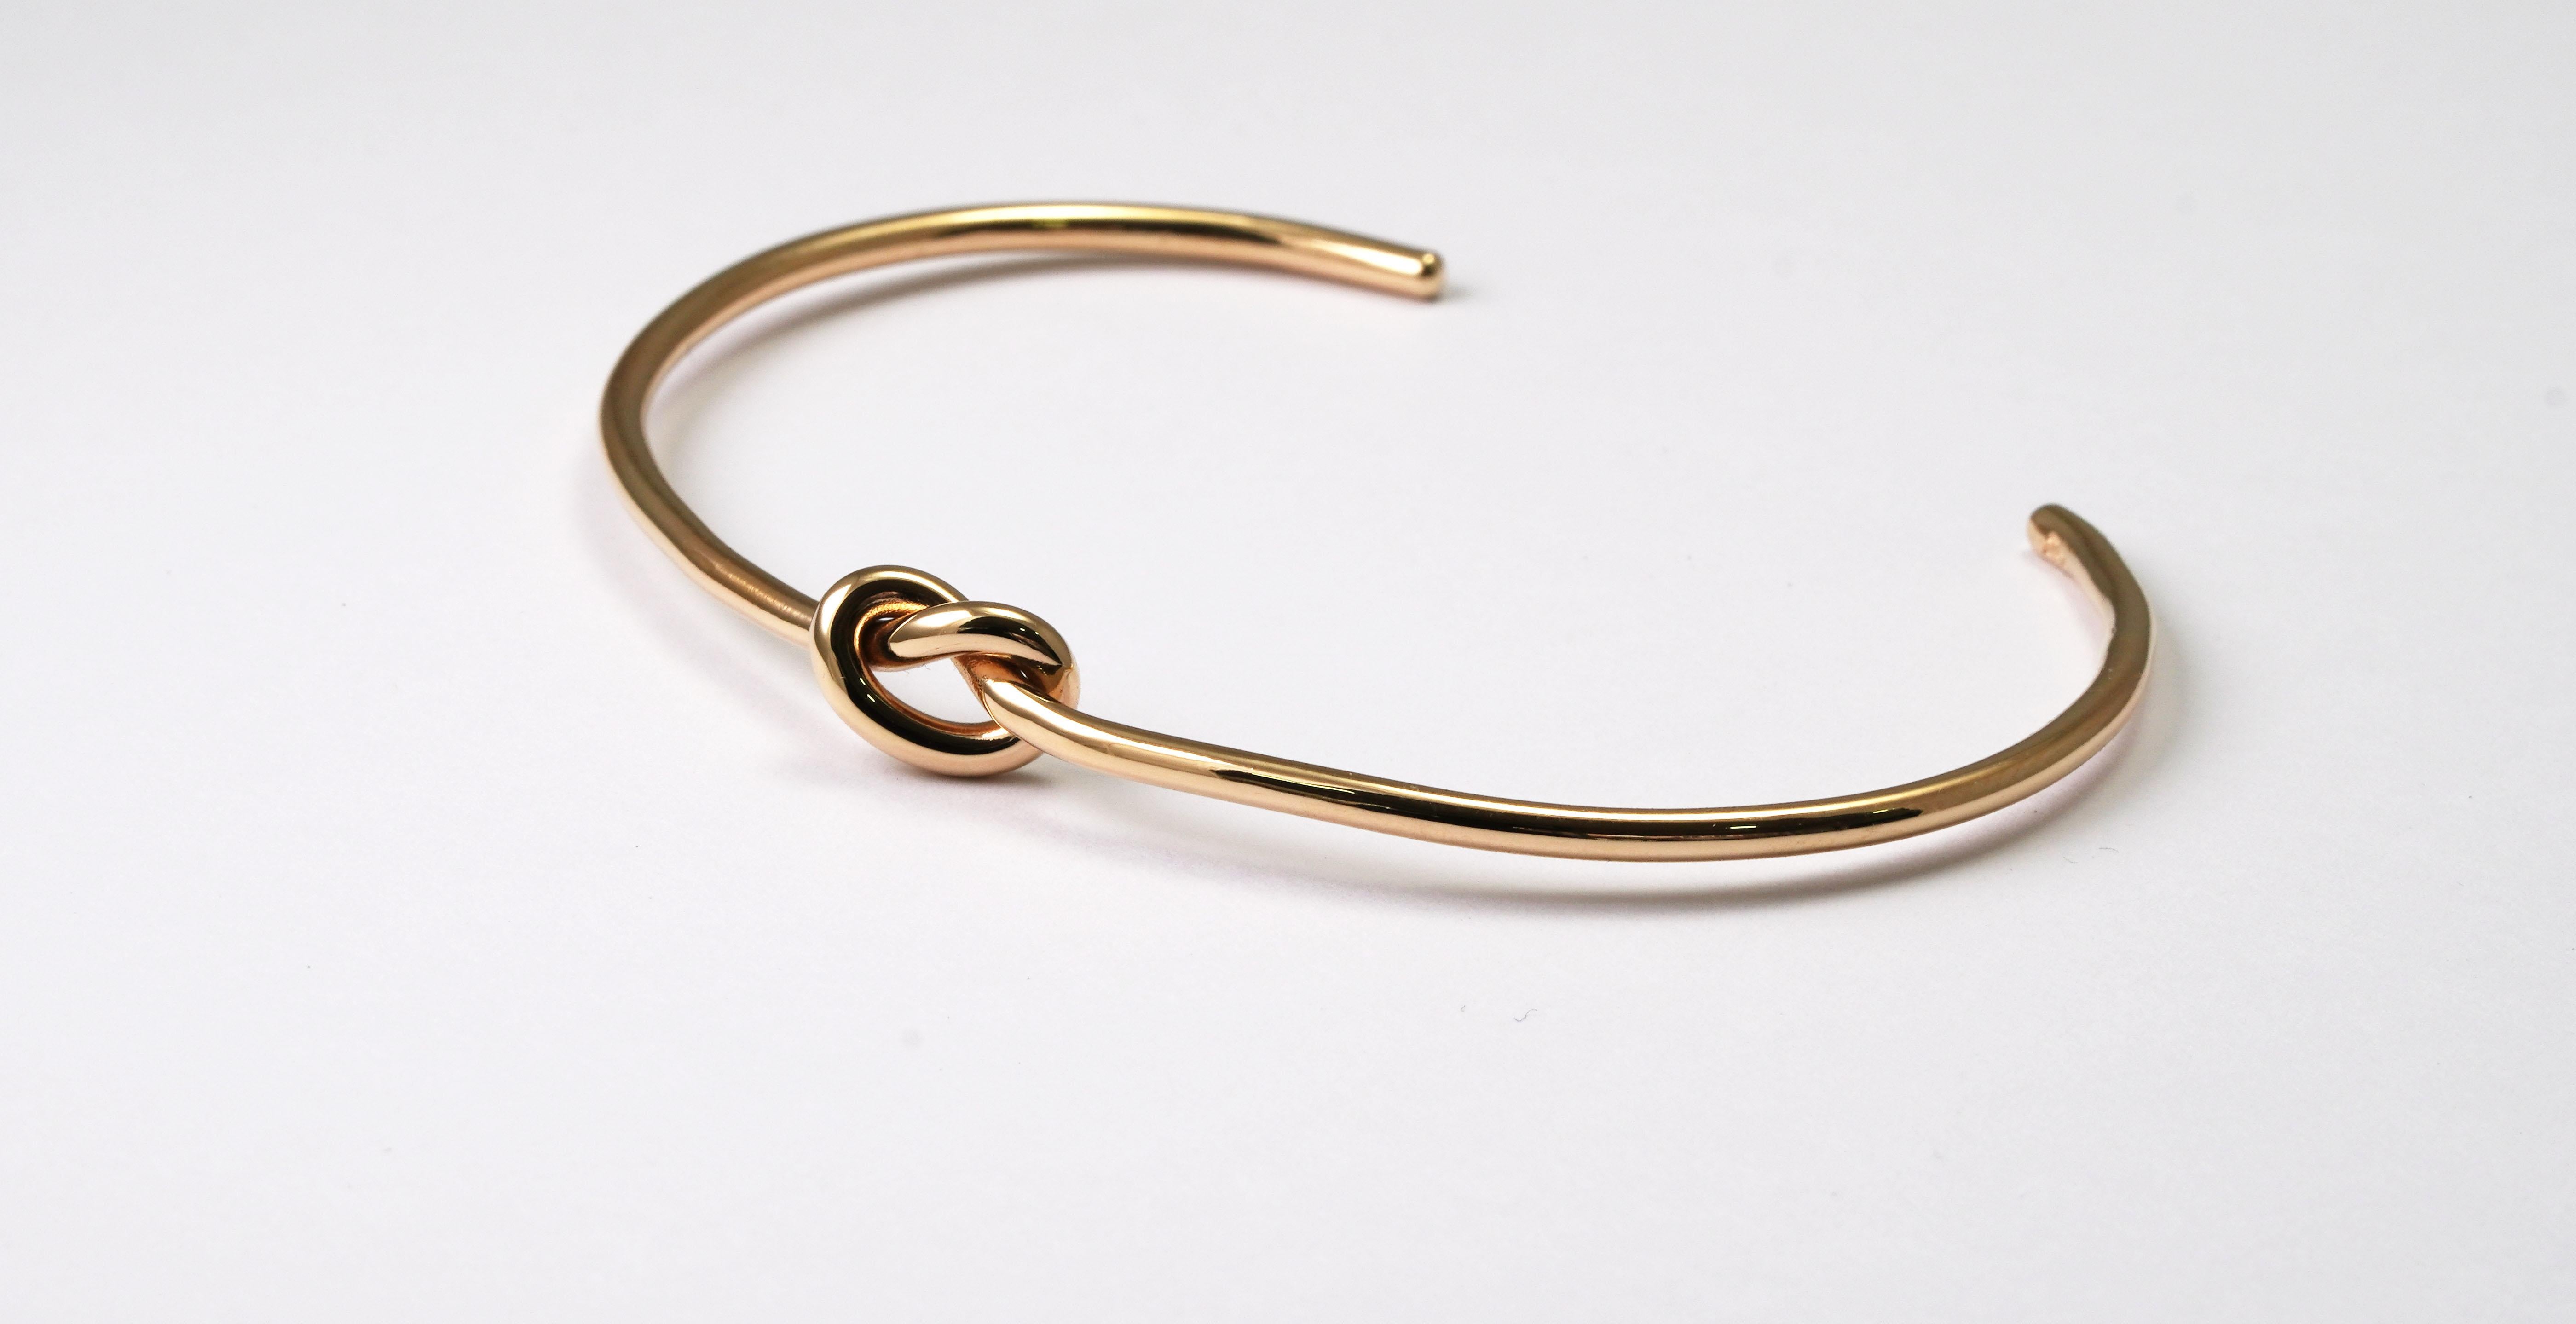 Handmade 18 kt Yellow Gold Bracelet
Gold color: Yellow
Dimensions: 58mm. x 42mm. 
Total weight: 7.09 grams 